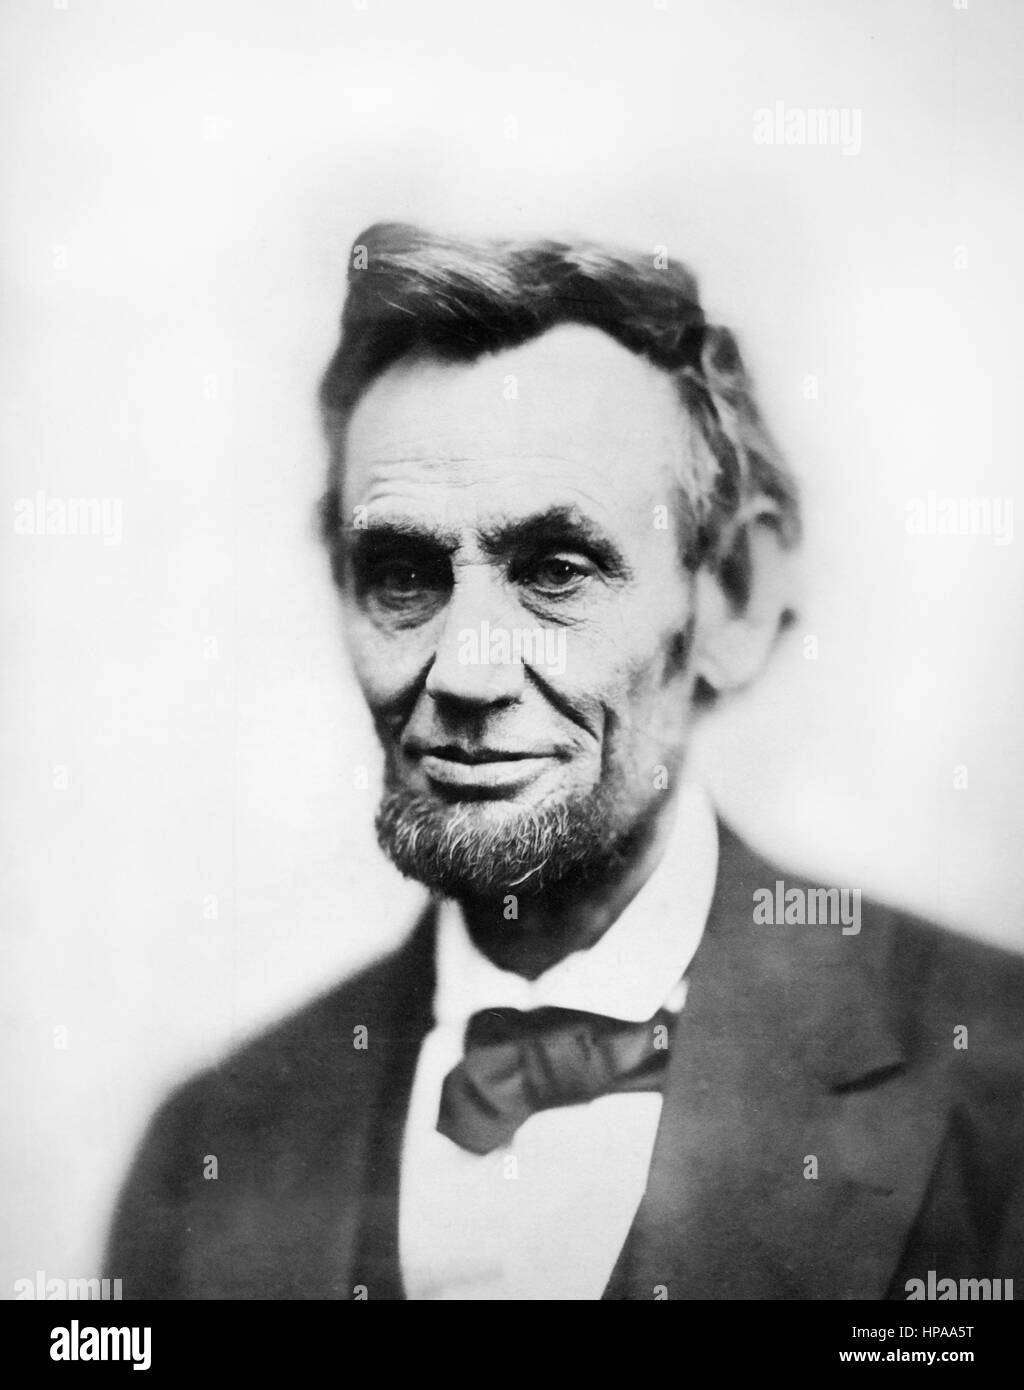 Abraham Lincoln (1809-1865), portrait by Alexander Gardner, 1865. The photograph was taken a month before his second inauguration. It is one of the last pictures taken of Lincoln prior to his assassination. Stock Photo